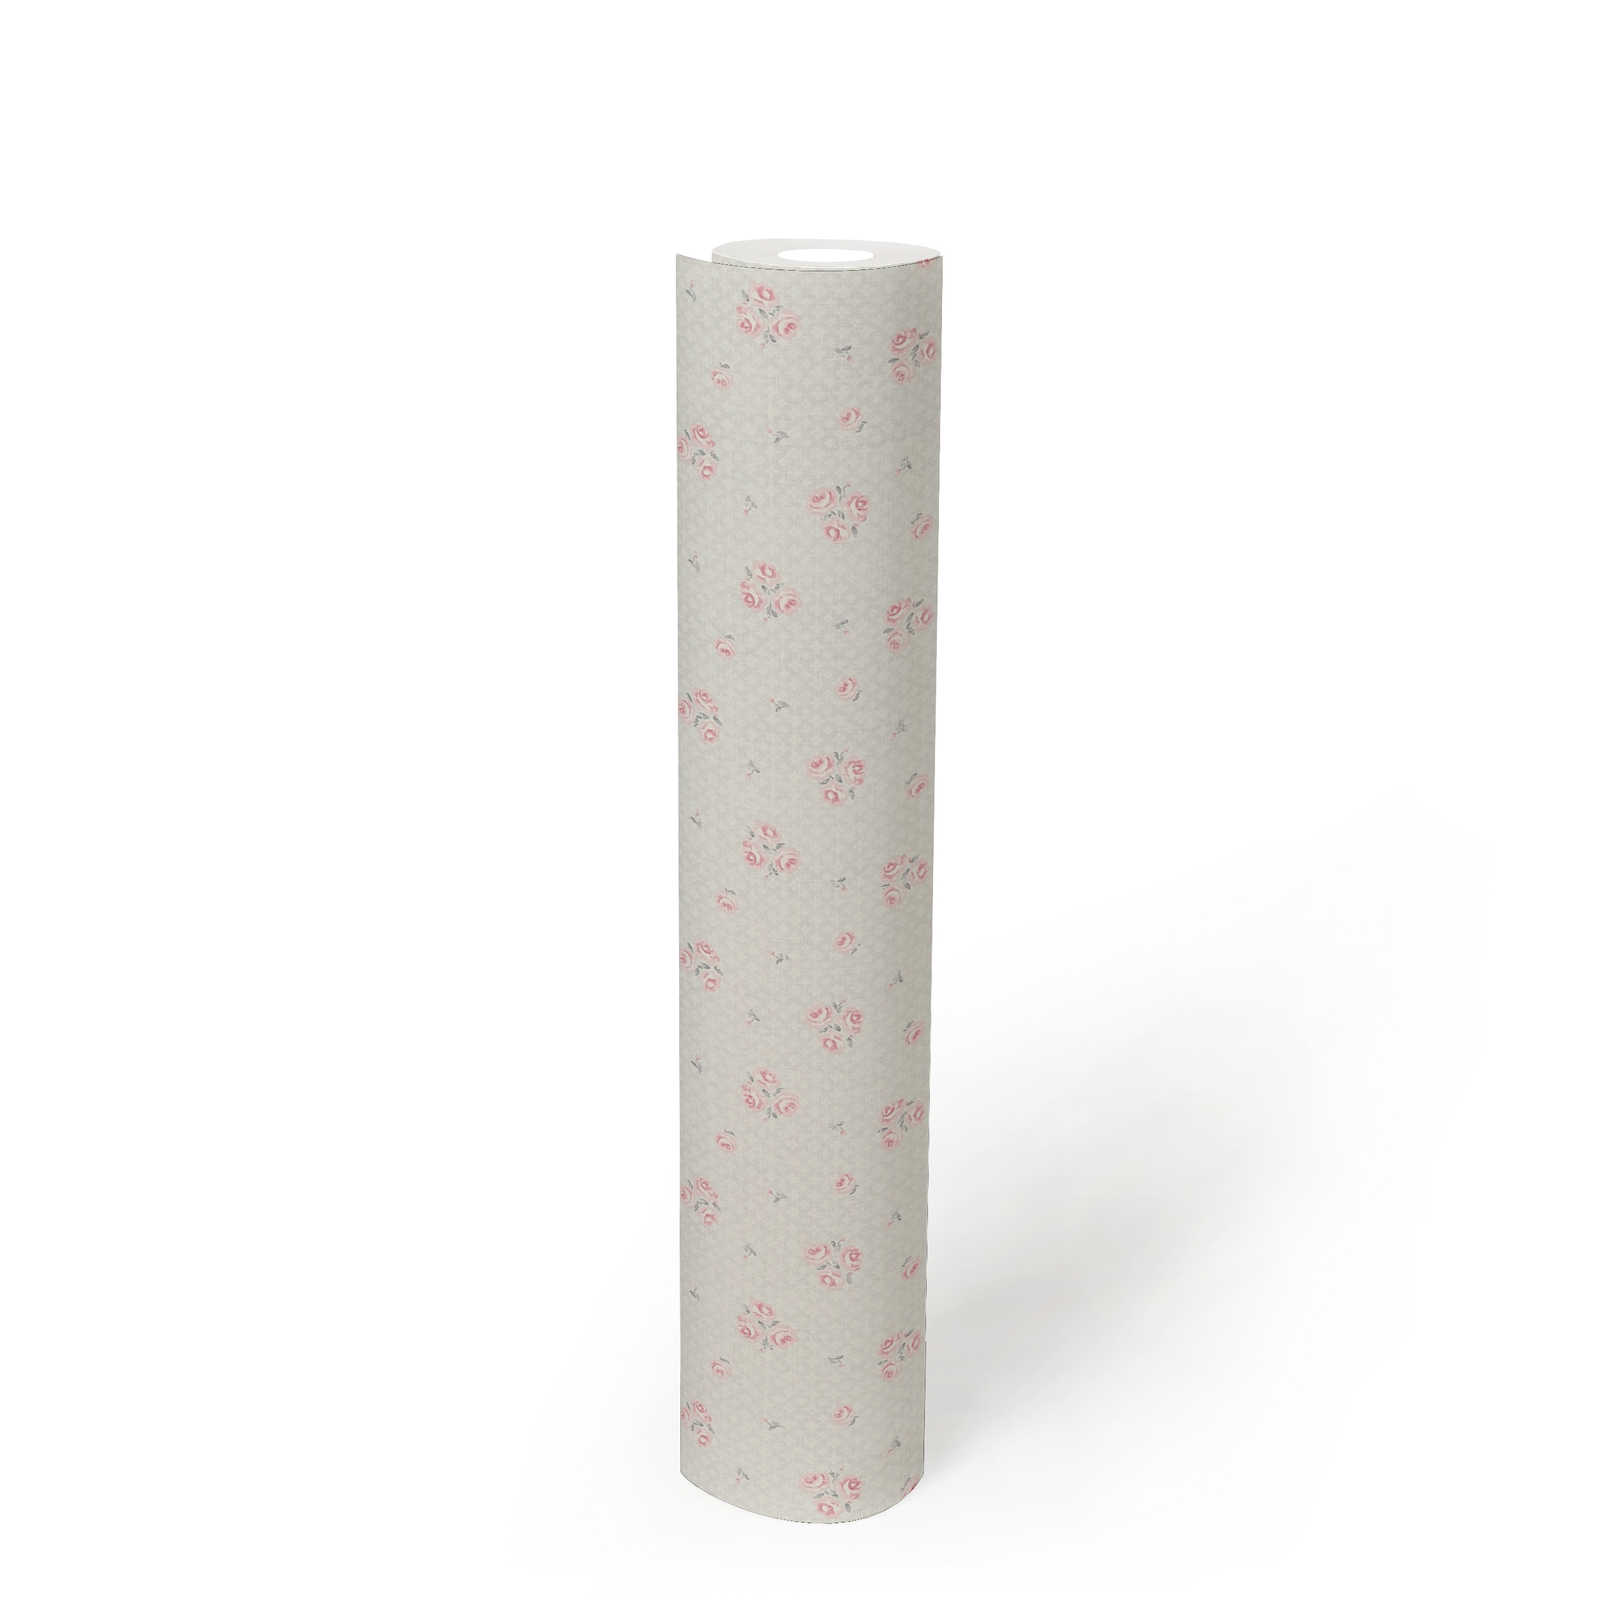             Non-woven wallpaper with fine Shabby Chic floral pattern - light grey, red, white
        